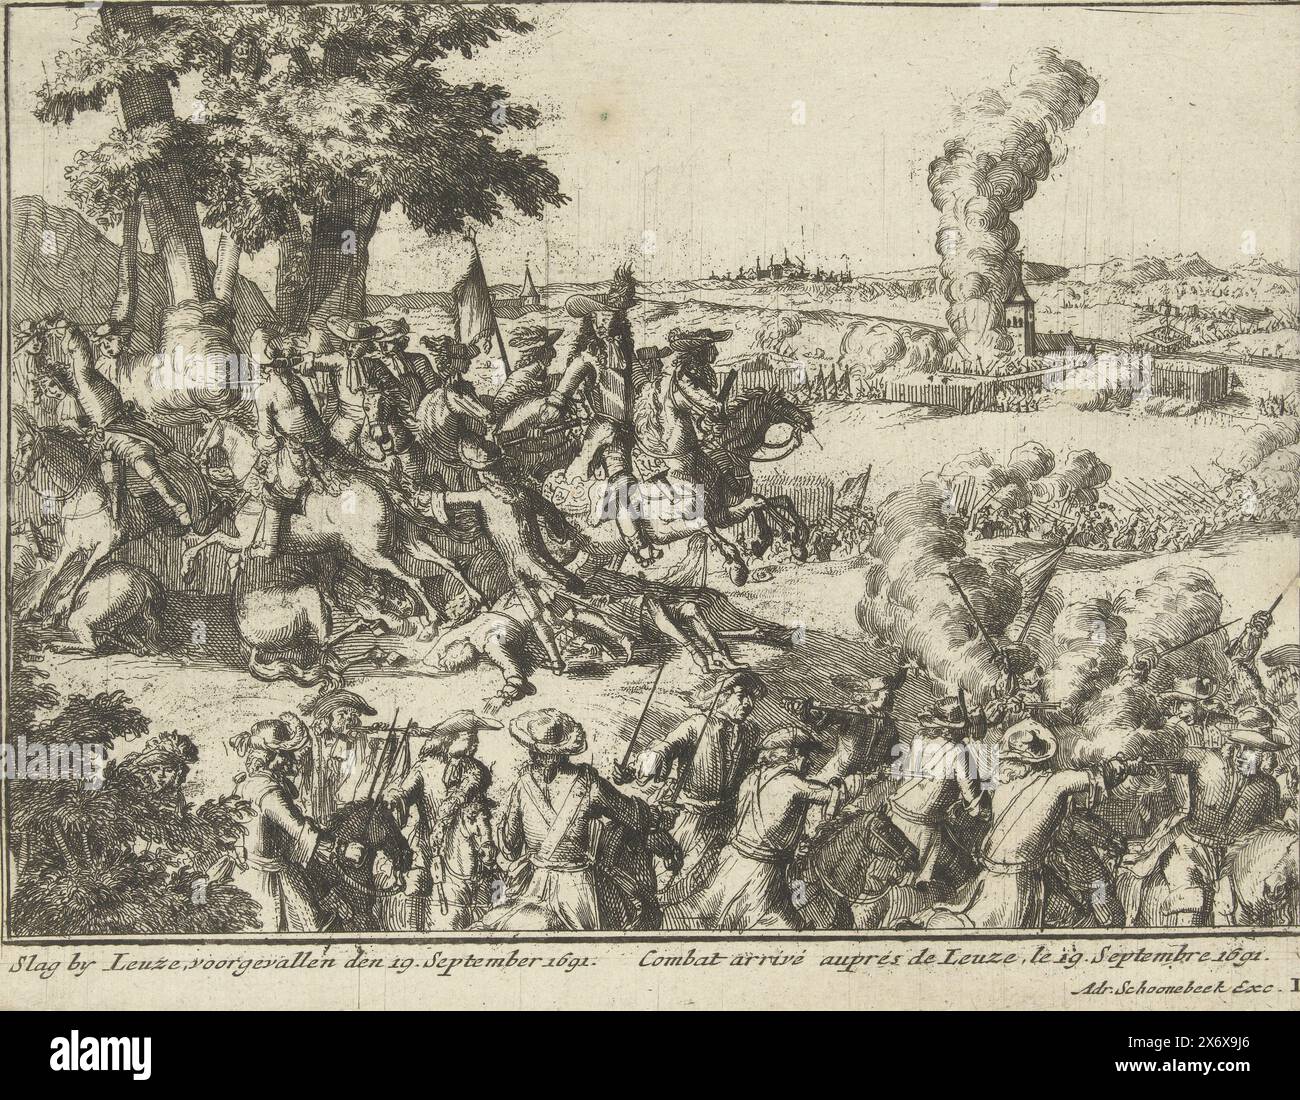 Battle of Leuze, 1691, Battle of Leuze, occurred on September 19, 1691 (title on object), England's Schoutoneel, depicting the most memorable event that occurred in and around England, Ireland, France and the Netherlands, since the year 1692, until the Burial of Queen Mary the Second, 1695 (series title on object), The army of King William III in the battle of Leuze during the Nine Years' War, the city was conquered on September 19. Plate no. III in the series 'England theater' about wars waged by William III in the years 1691-1695 after the Glorious Revolution, (fourth part). With captions in Stock Photo